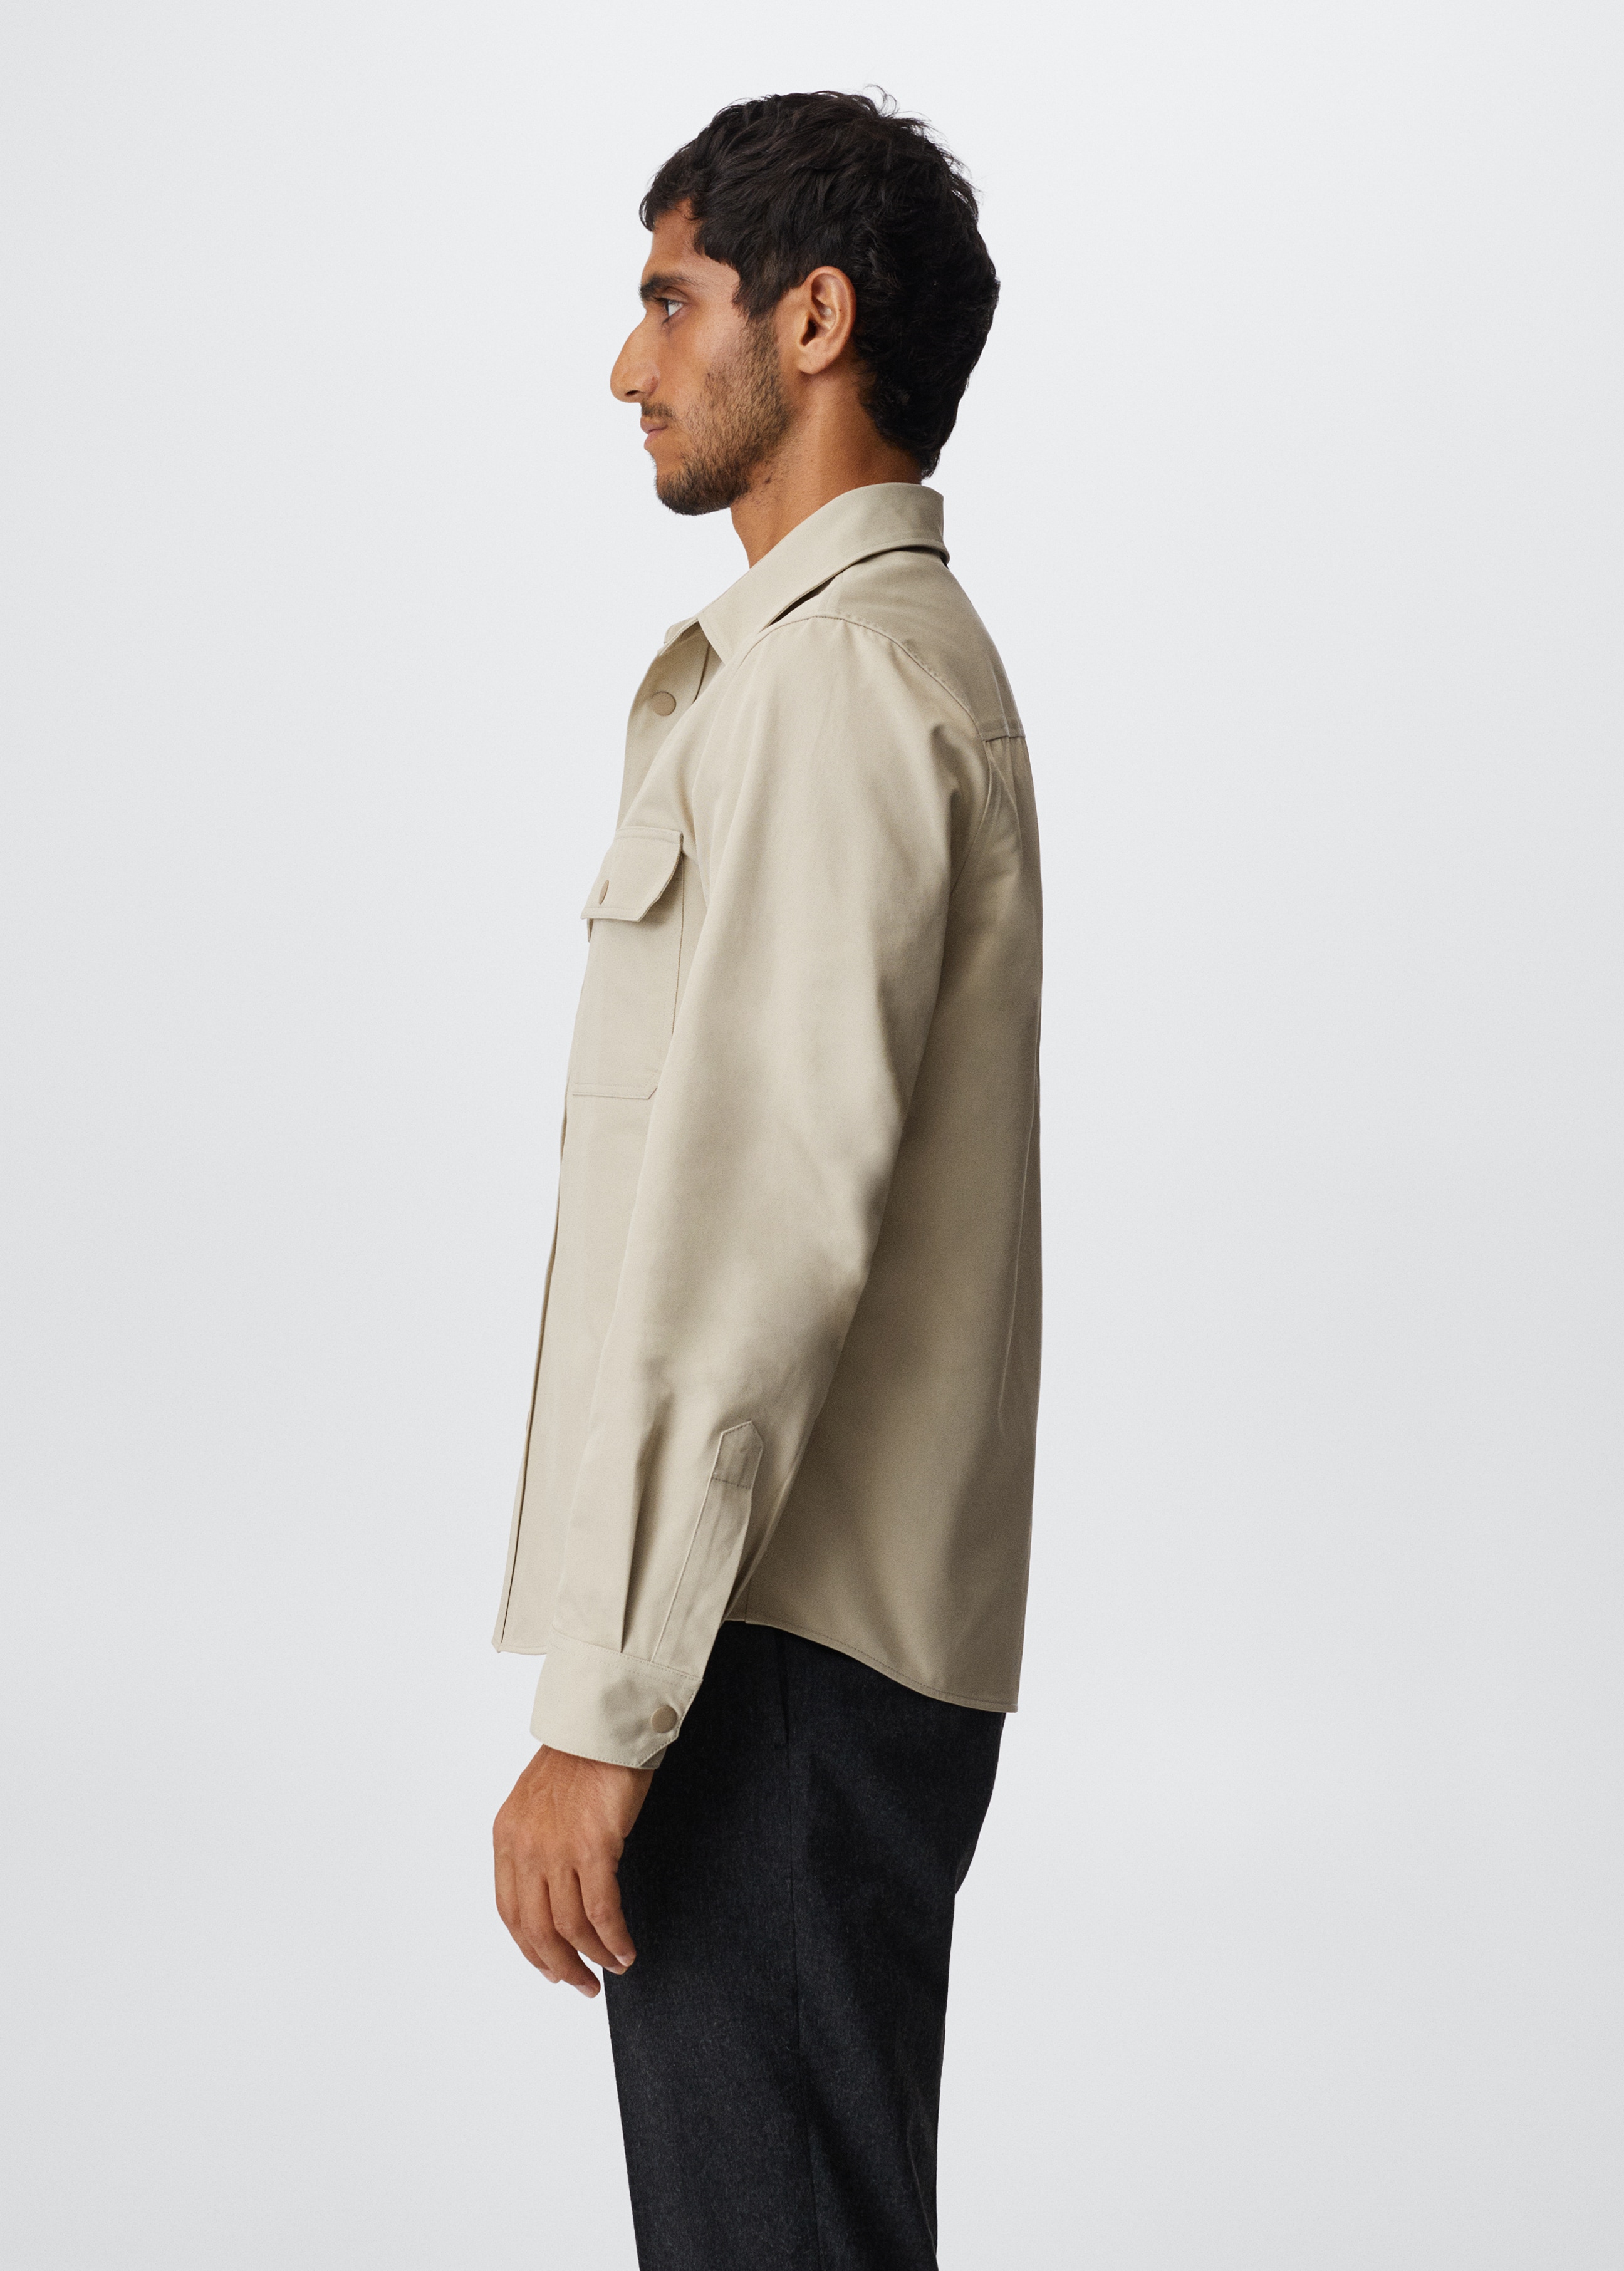 Twill cotton shirt - Details of the article 6